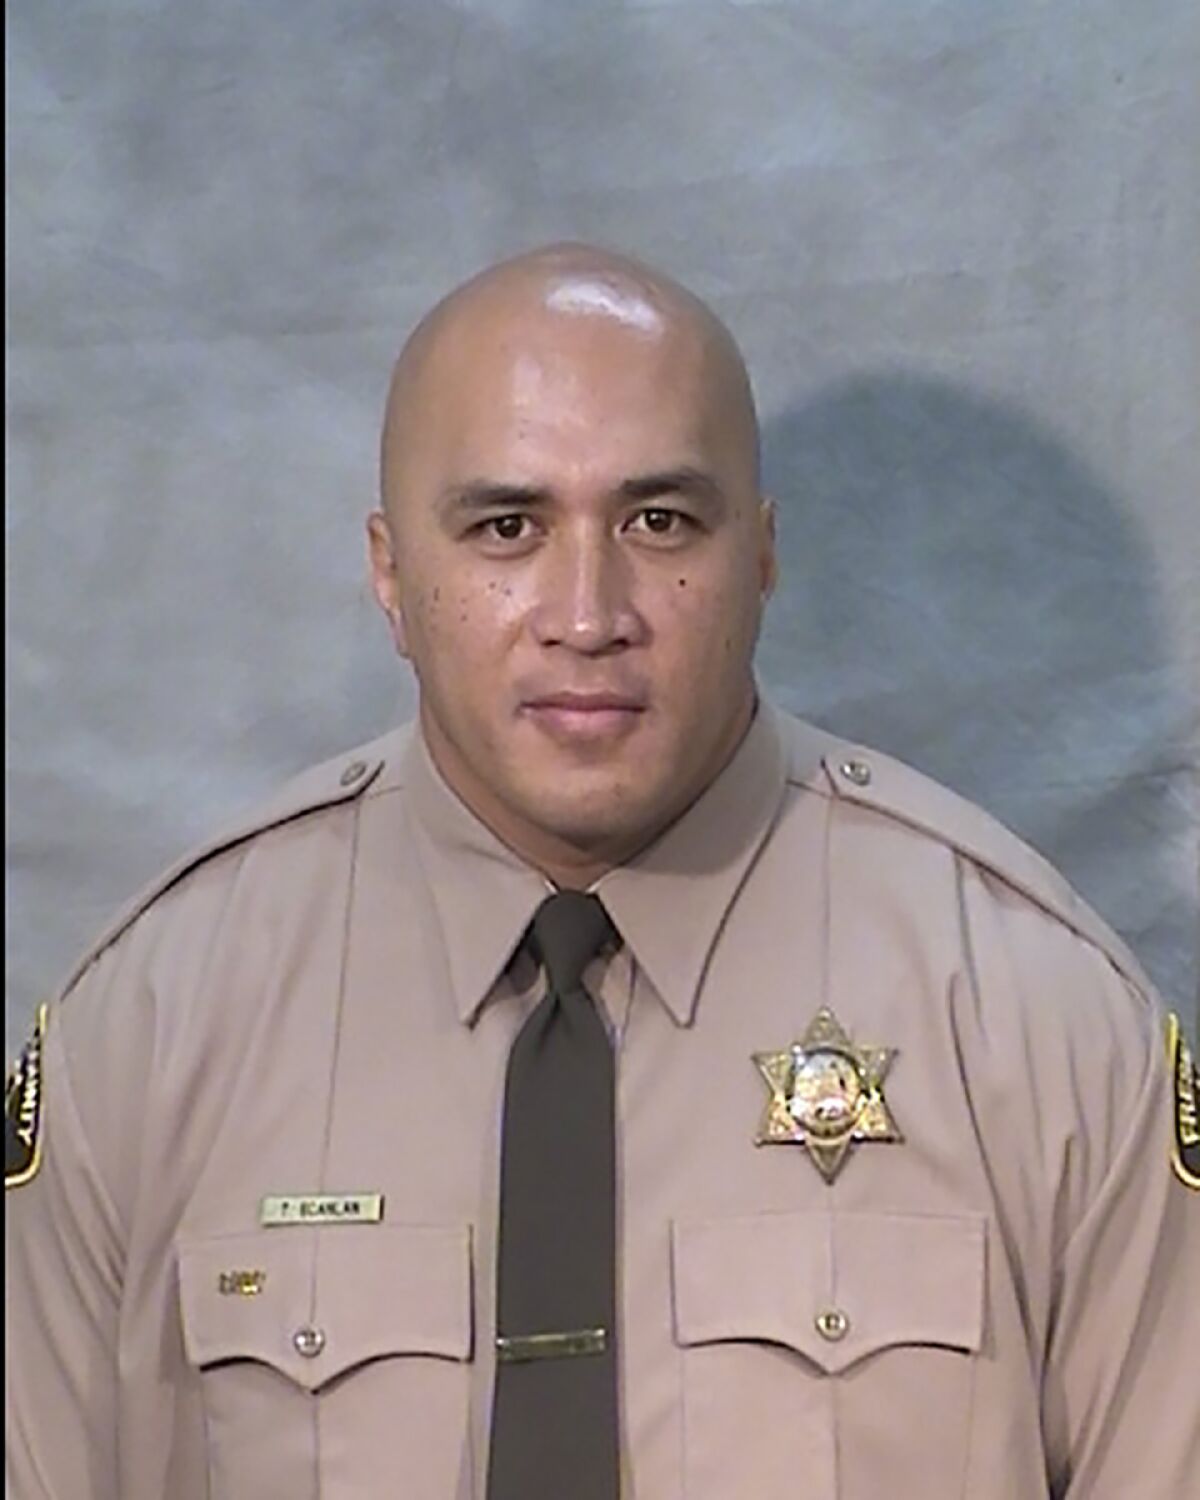 FILE - This undated handout photo provided by the Fresno County Sheriff's Department shows Fresno Deputy Sheriff Toamalama Scanlan. Scanlan succumbed to injuries, sustained in a 2016 jail lobby shooting and died Tuesday, Oct. 12, 2021. Scanlan has been hospitalized since Sept. 3, 2016, when he came to the aid of a fellow officer in the lobby of the main jail. Scanlan, 46, is survived by his wife and six children. (Fresno County Sheriffs Office Photo via AP, File)